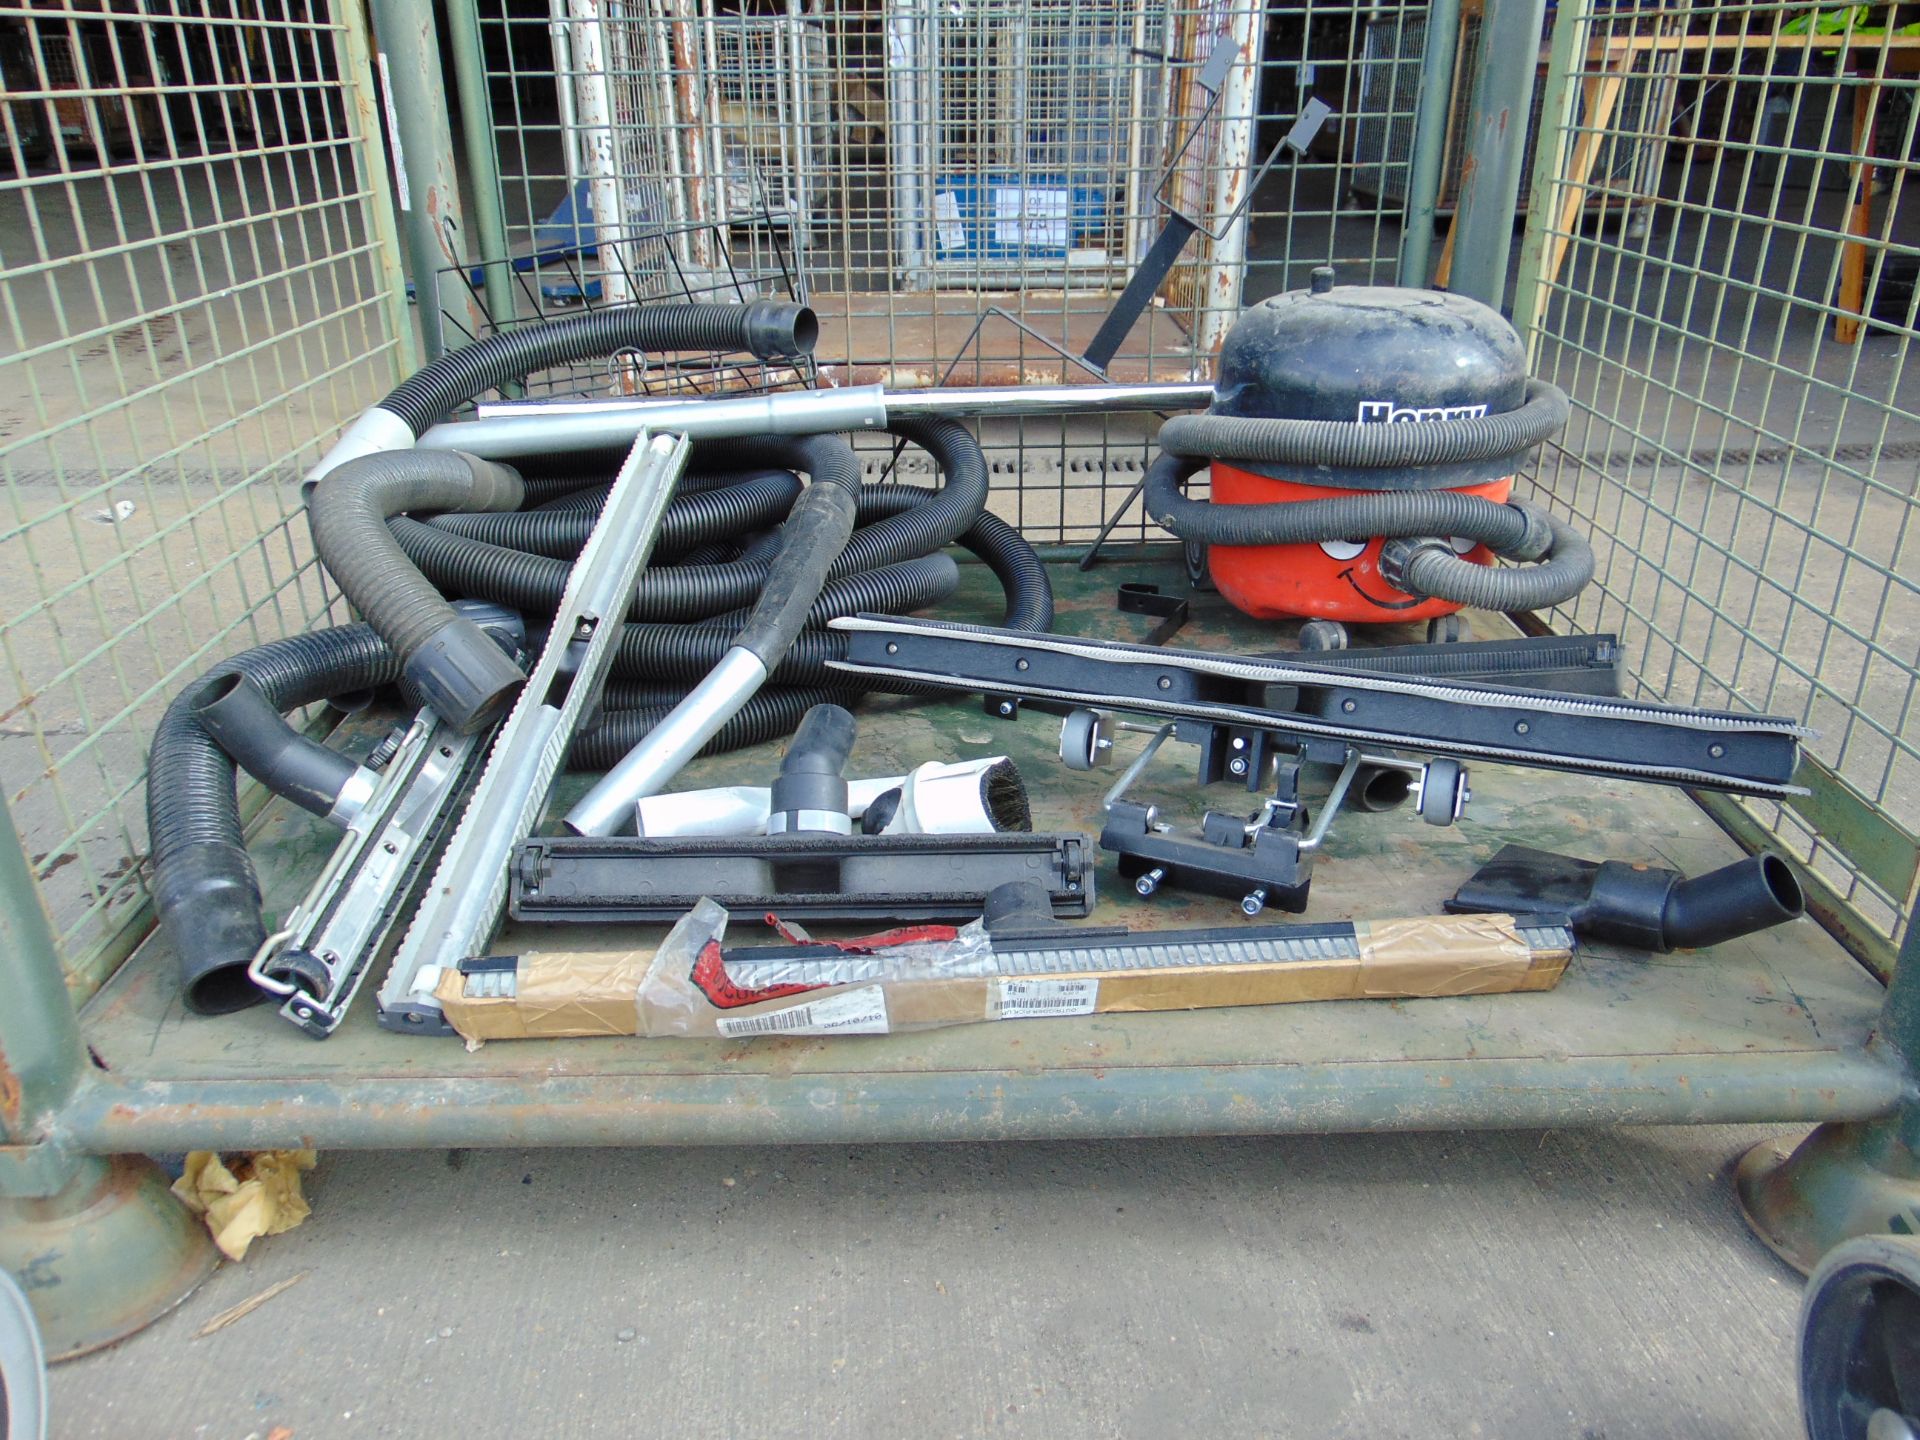 1 x Euroclean Shop Vacuum & Henry Vacuum w/ Trolley, Piping, Various Attachments etc. - Image 7 of 11